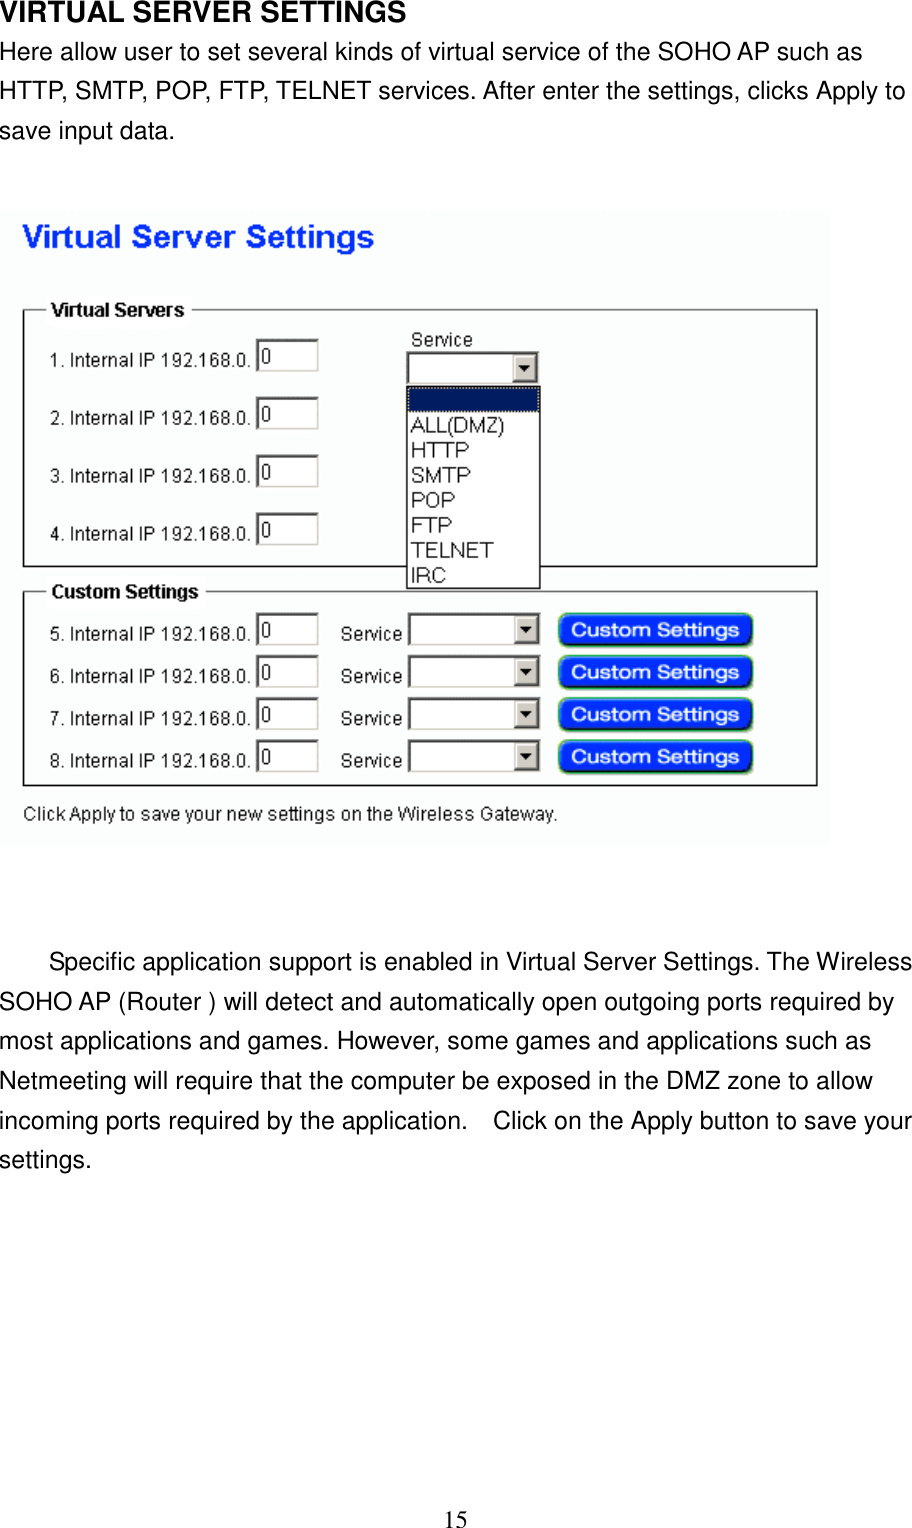 15VIRTUAL SERVER SETTINGSHere allow user to set several kinds of virtual service of the SOHO AP such asHTTP, SMTP, POP, FTP, TELNET services. After enter the settings, clicks Apply tosave input data.Specific application support is enabled in Virtual Server Settings. The WirelessSOHO AP (Router ) will detect and automatically open outgoing ports required bymost applications and games. However, some games and applications such asNetmeeting will require that the computer be exposed in the DMZ zone to allowincoming ports required by the application.    Click on the Apply button to save yoursettings.